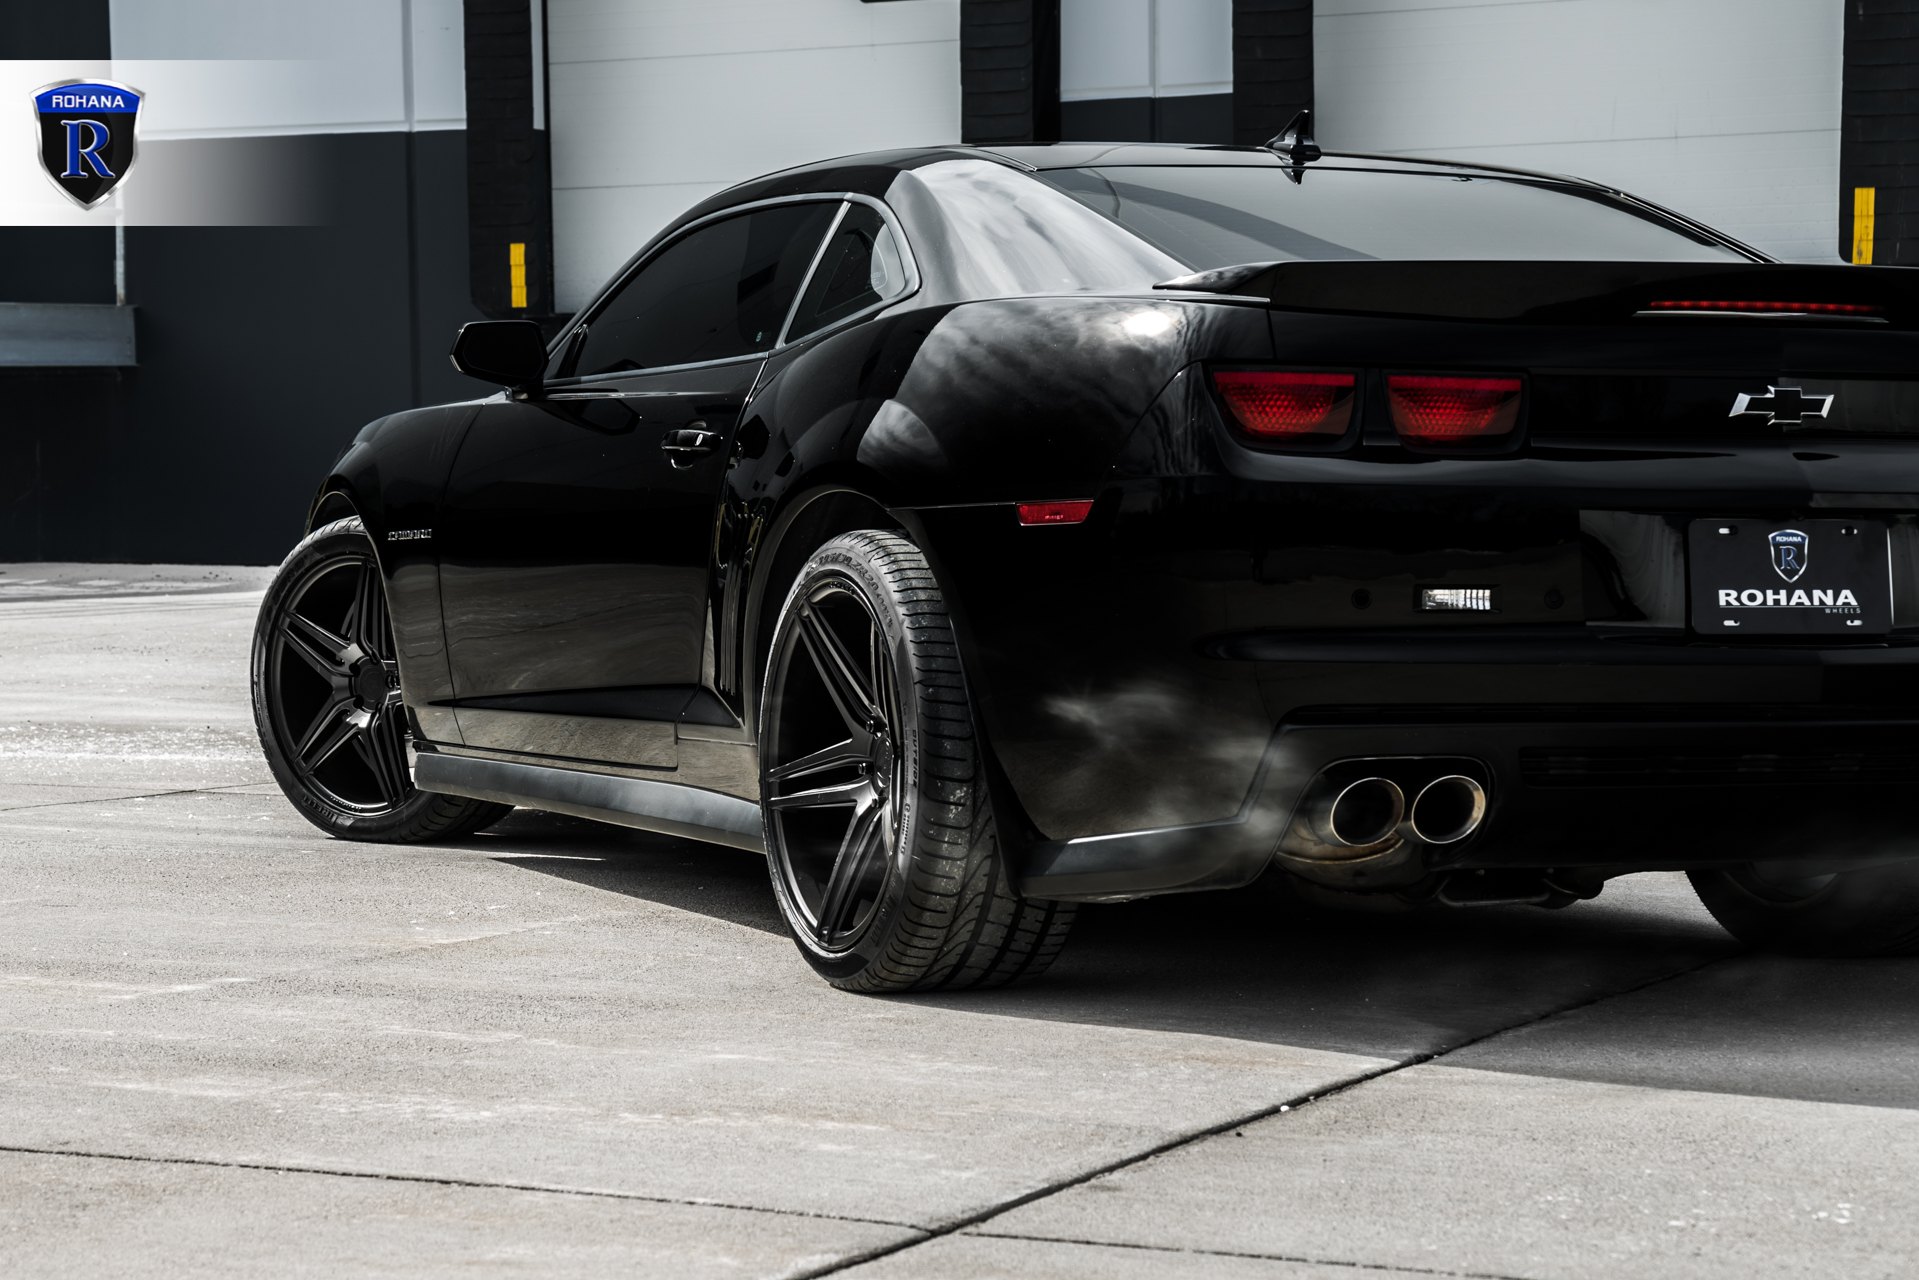 Black Chevy Camaro with Aftermarket Rear Diffuser - Photo by Rohana Wheels